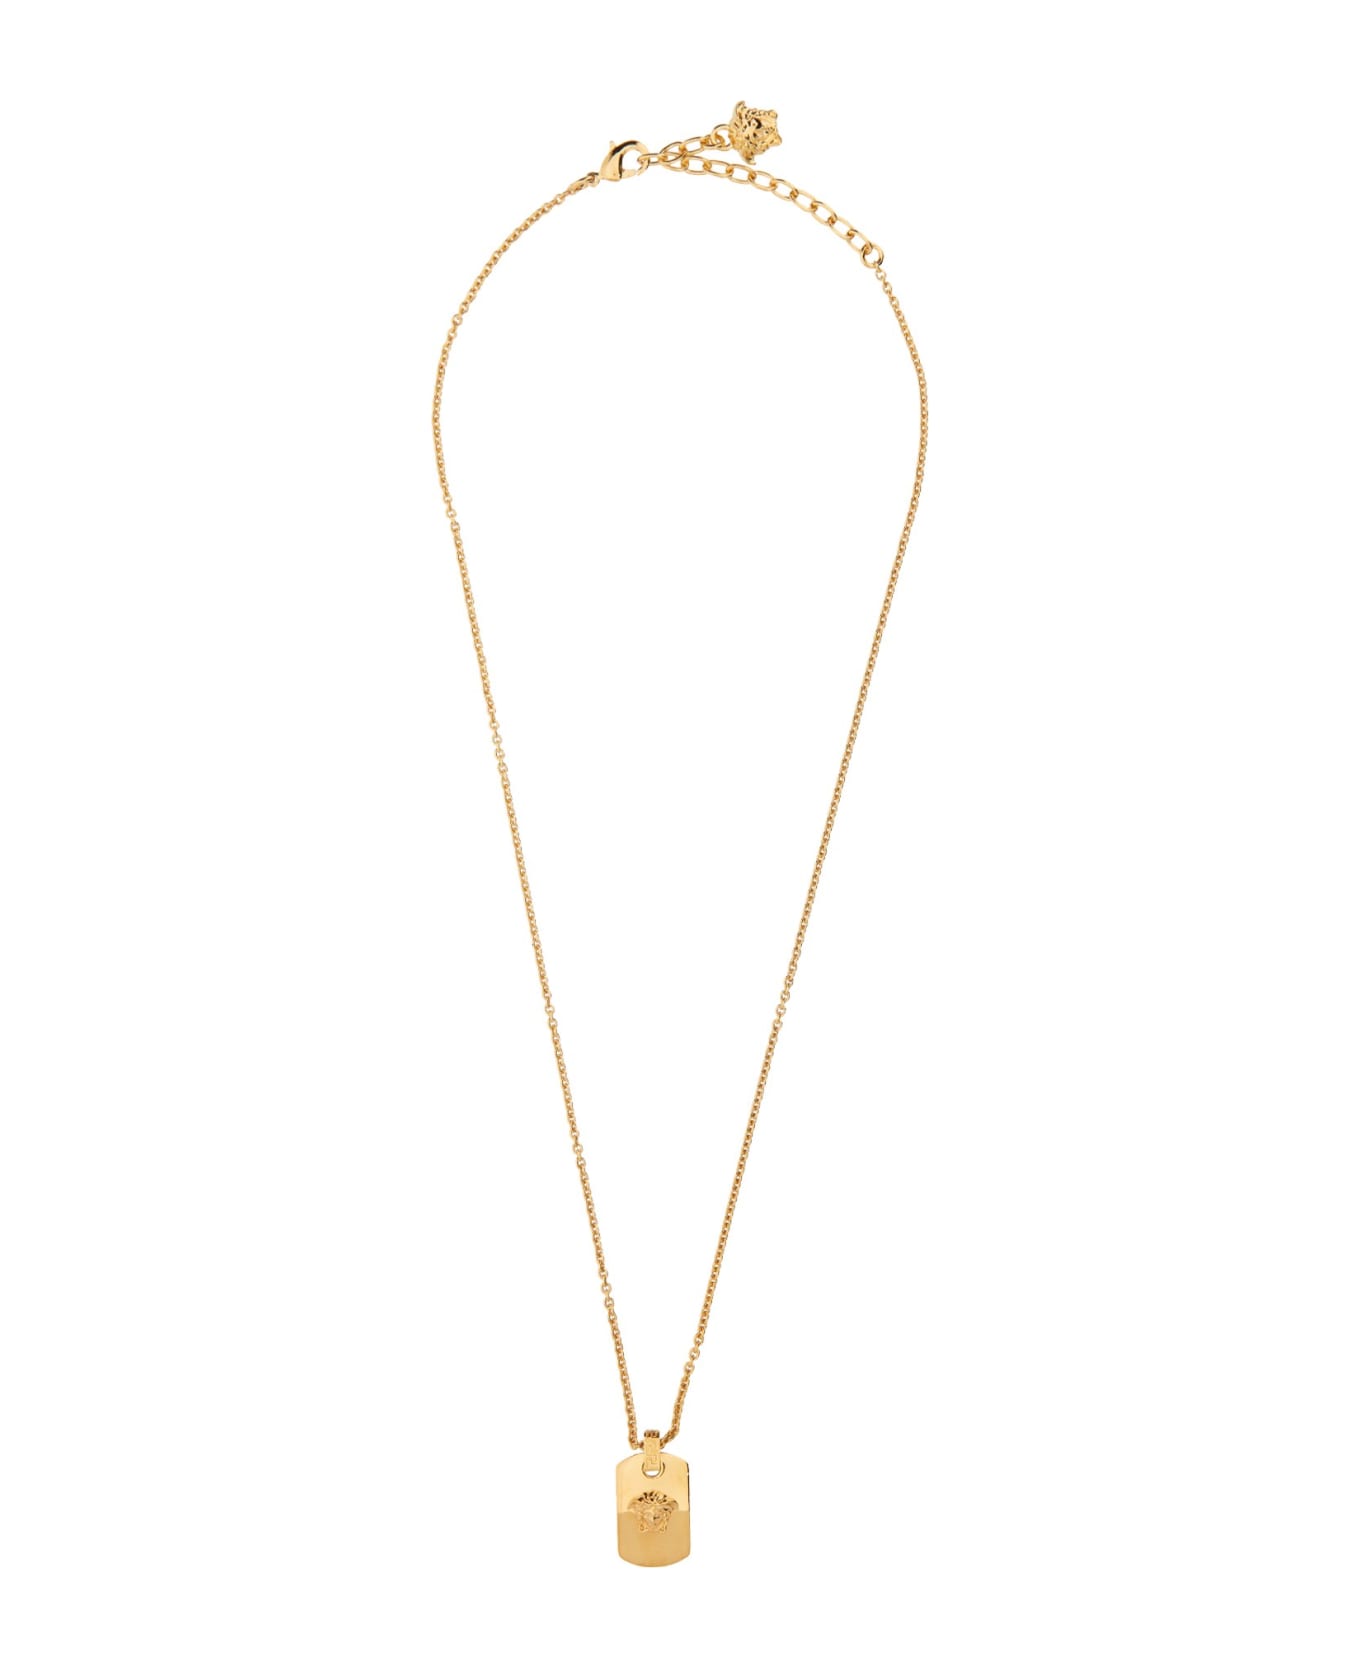 Versace Jellyfish Necklace - Gold